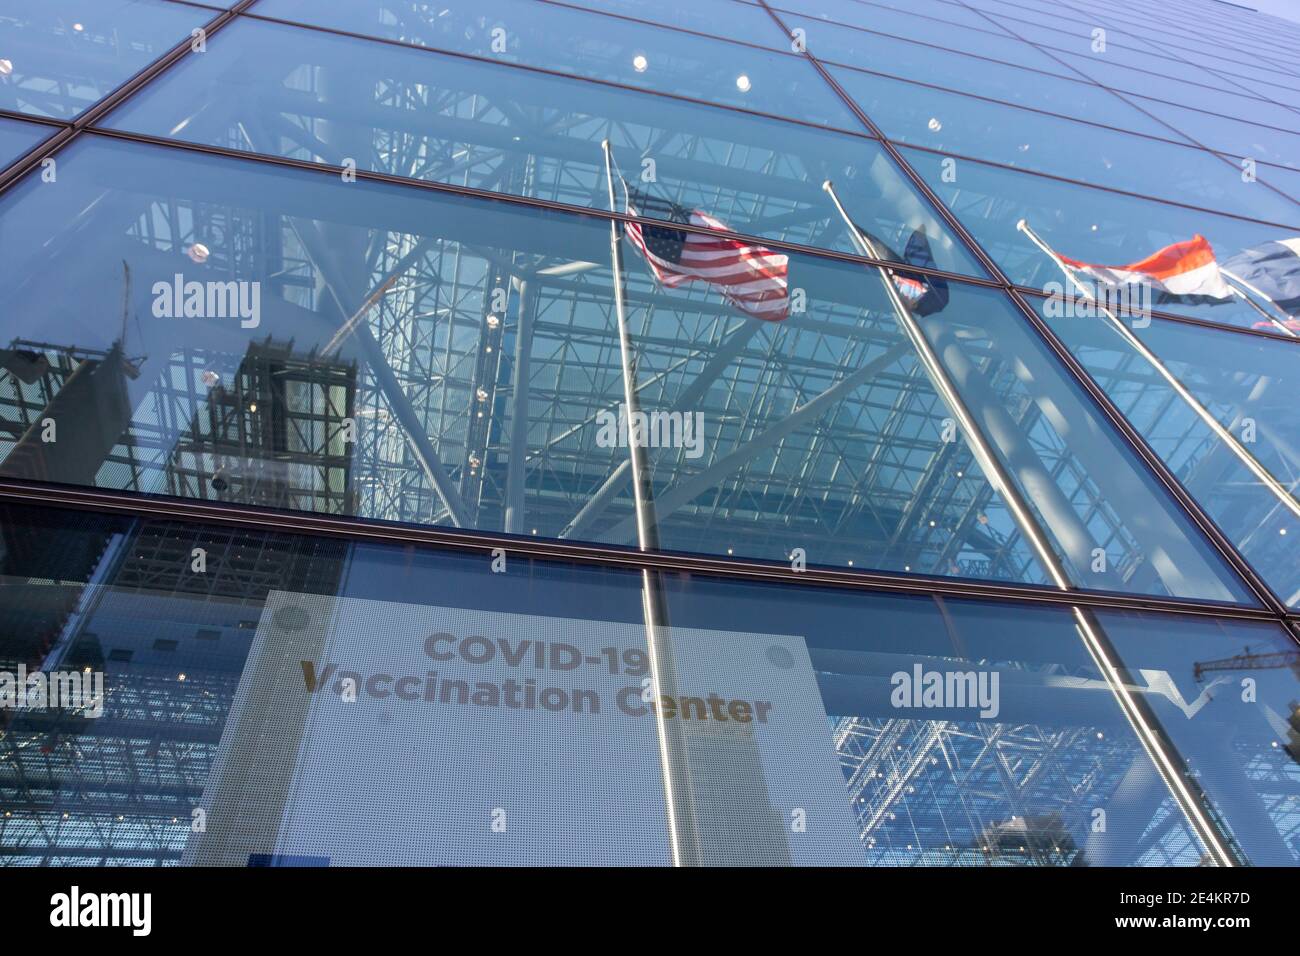 New York, USA. 23rd Jan, 2021. Flags are reflected in the window of a COVID-19 vaccination center at the Jacob K. Javits Convention Center in New York, the United States, Jan. 23, 2021. The total number of confirmed COVID-19 cases in the United States topped 24.99 million, according to the data released by Johns Hopkins University on Saturday. Credit: Michael Nagle/Xinhua/Alamy Live News Stock Photo